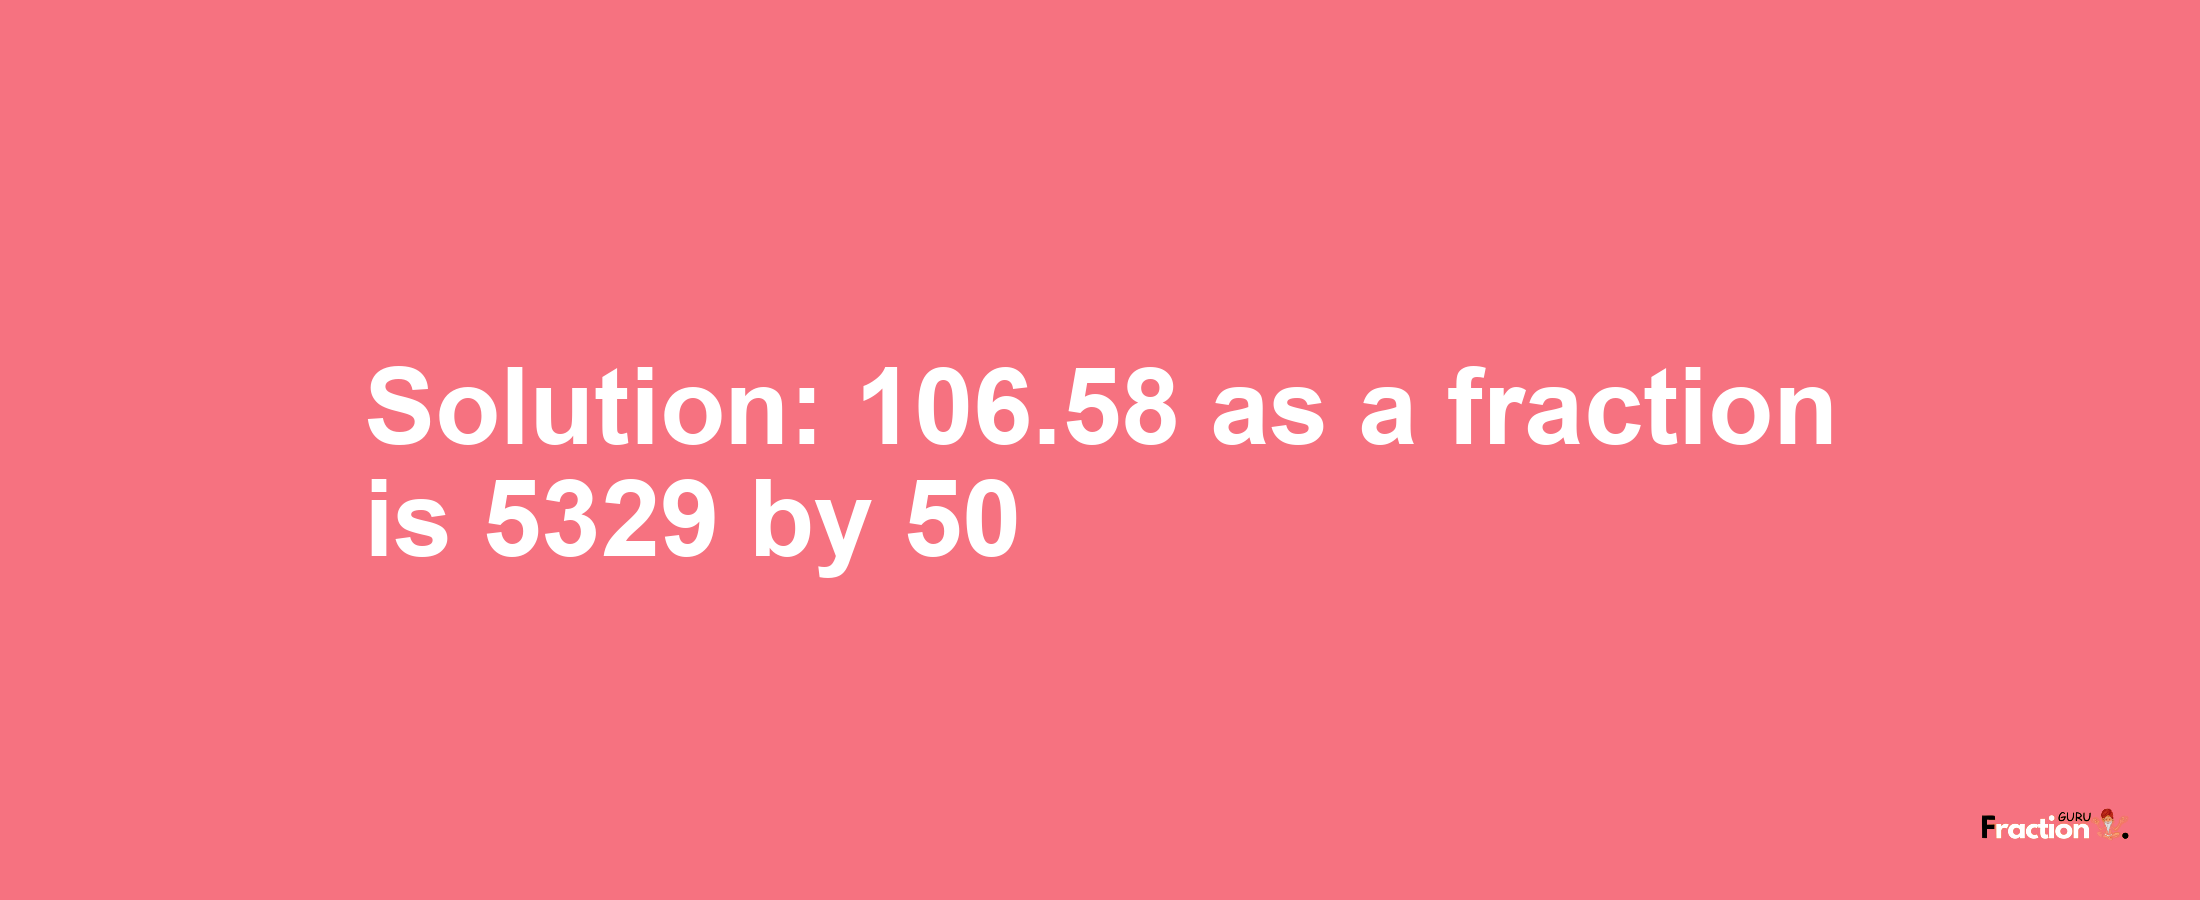 Solution:106.58 as a fraction is 5329/50